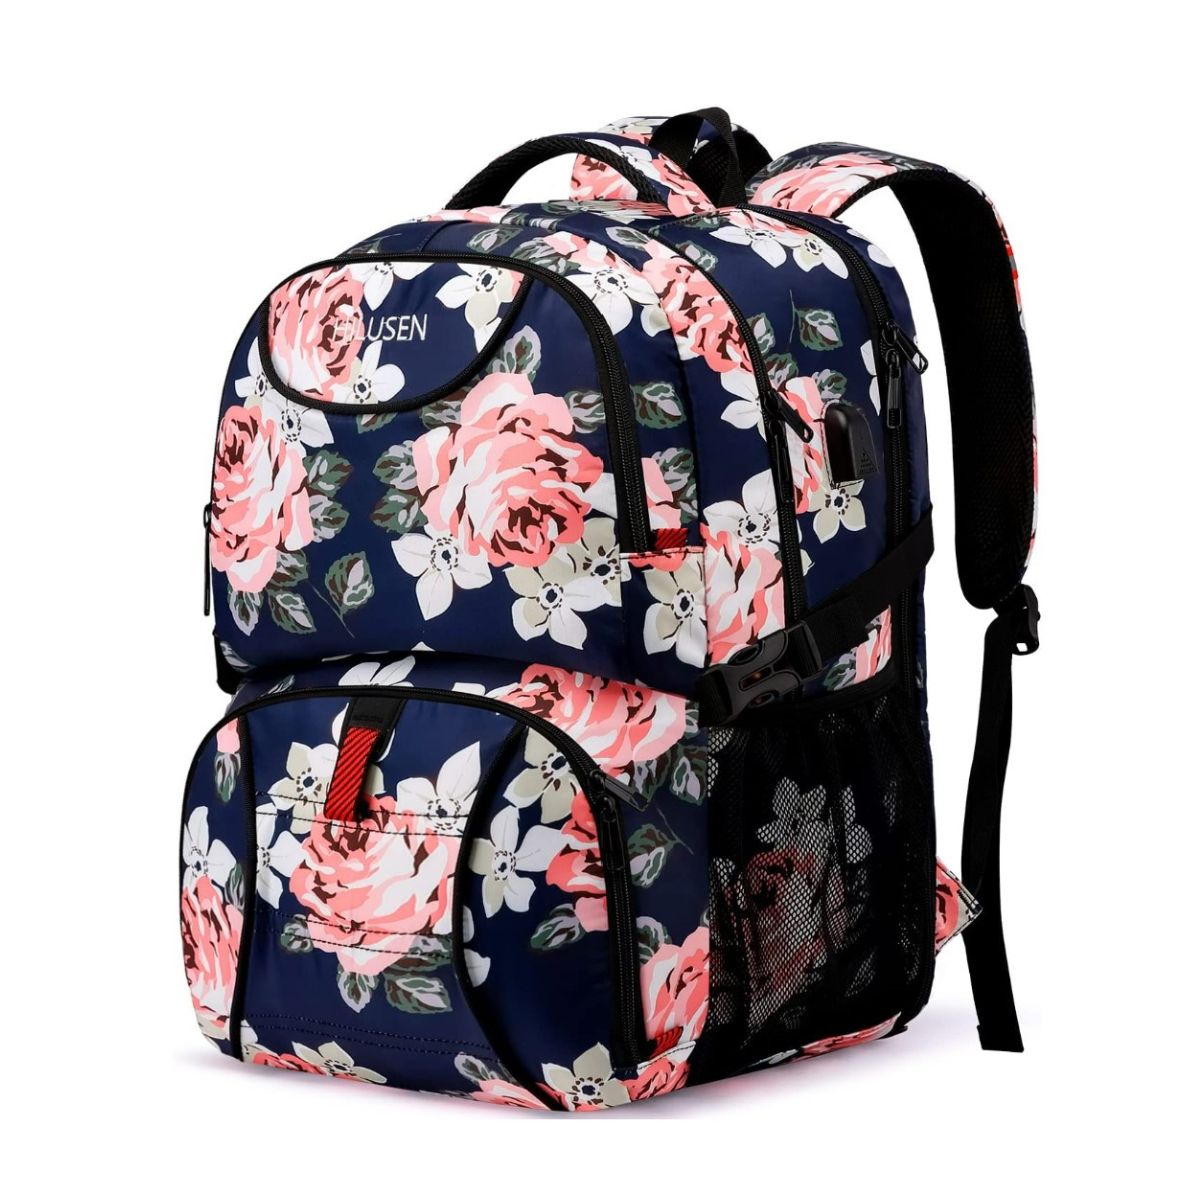 Floral backpack lunch box